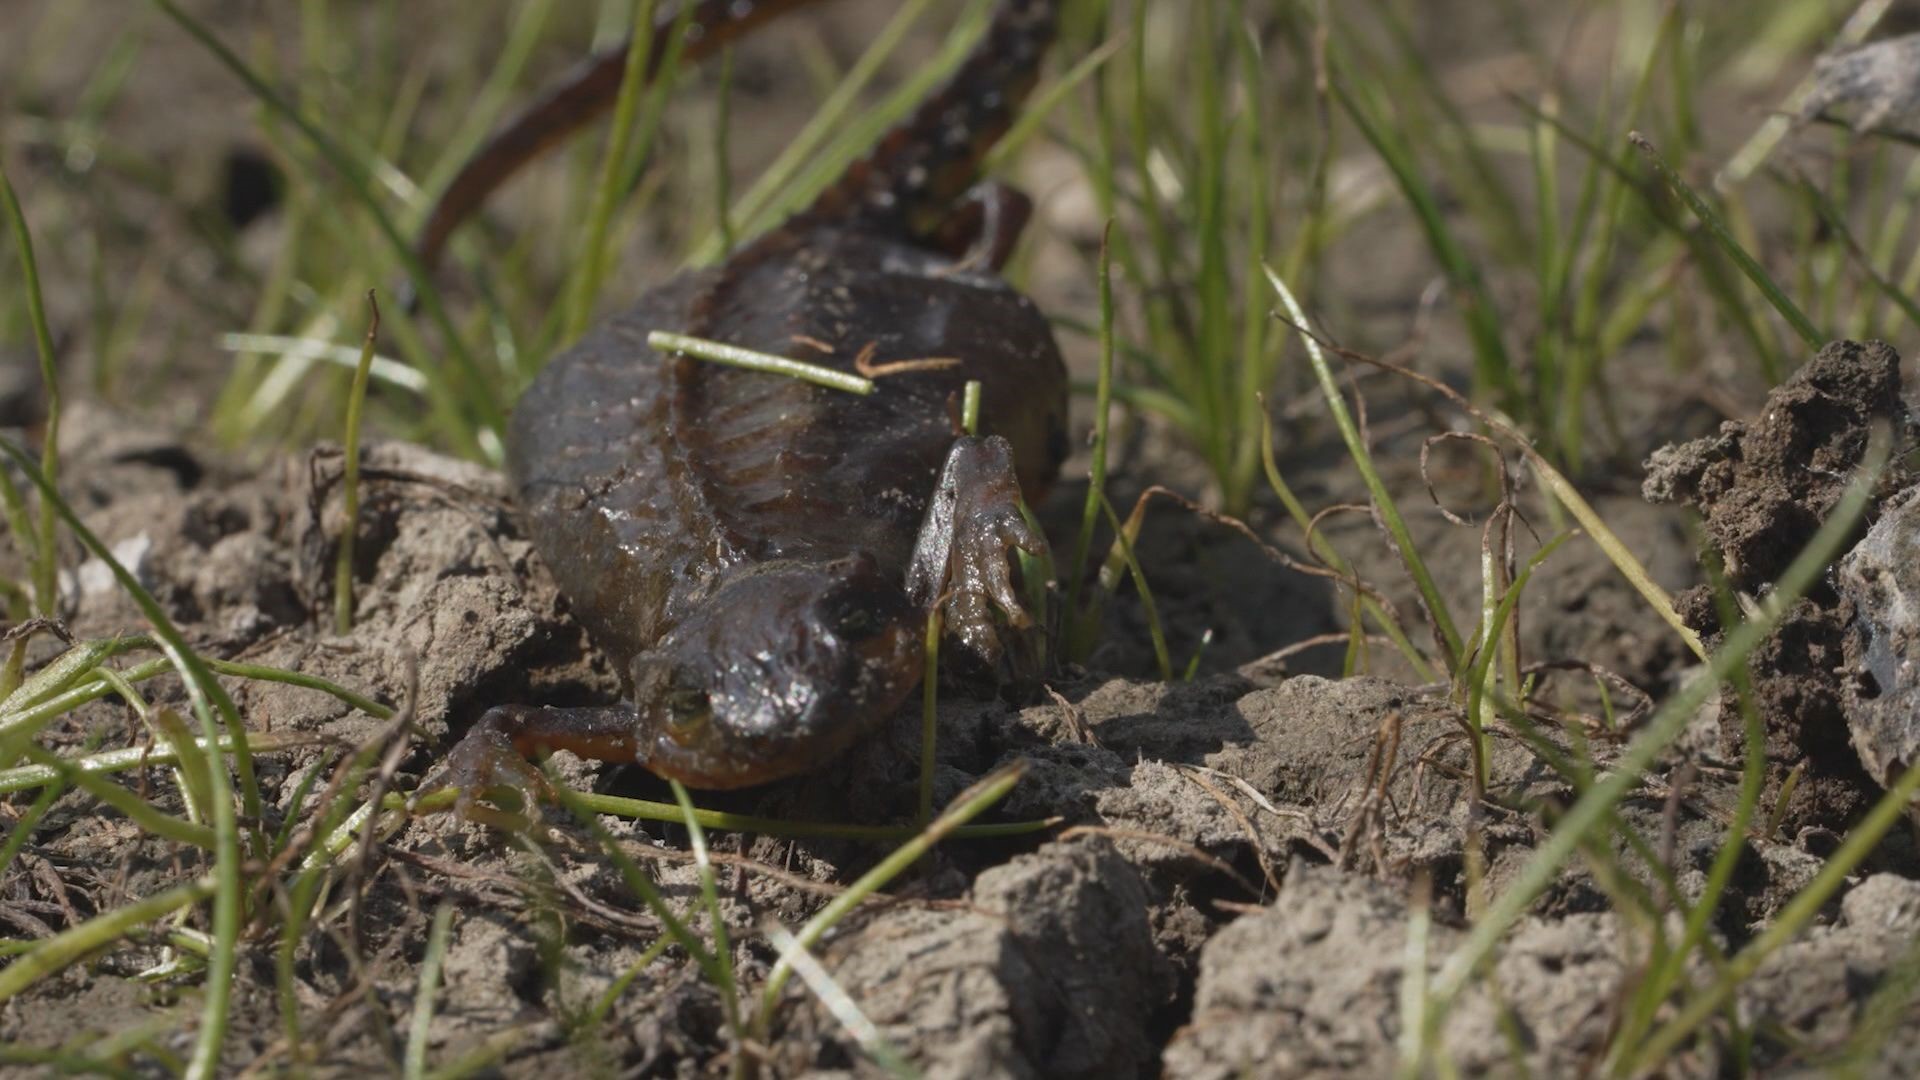 The Washington Department of Fish and Wildlife is investigating why a large number of rough-skinned newts are dying without clear causes of death.